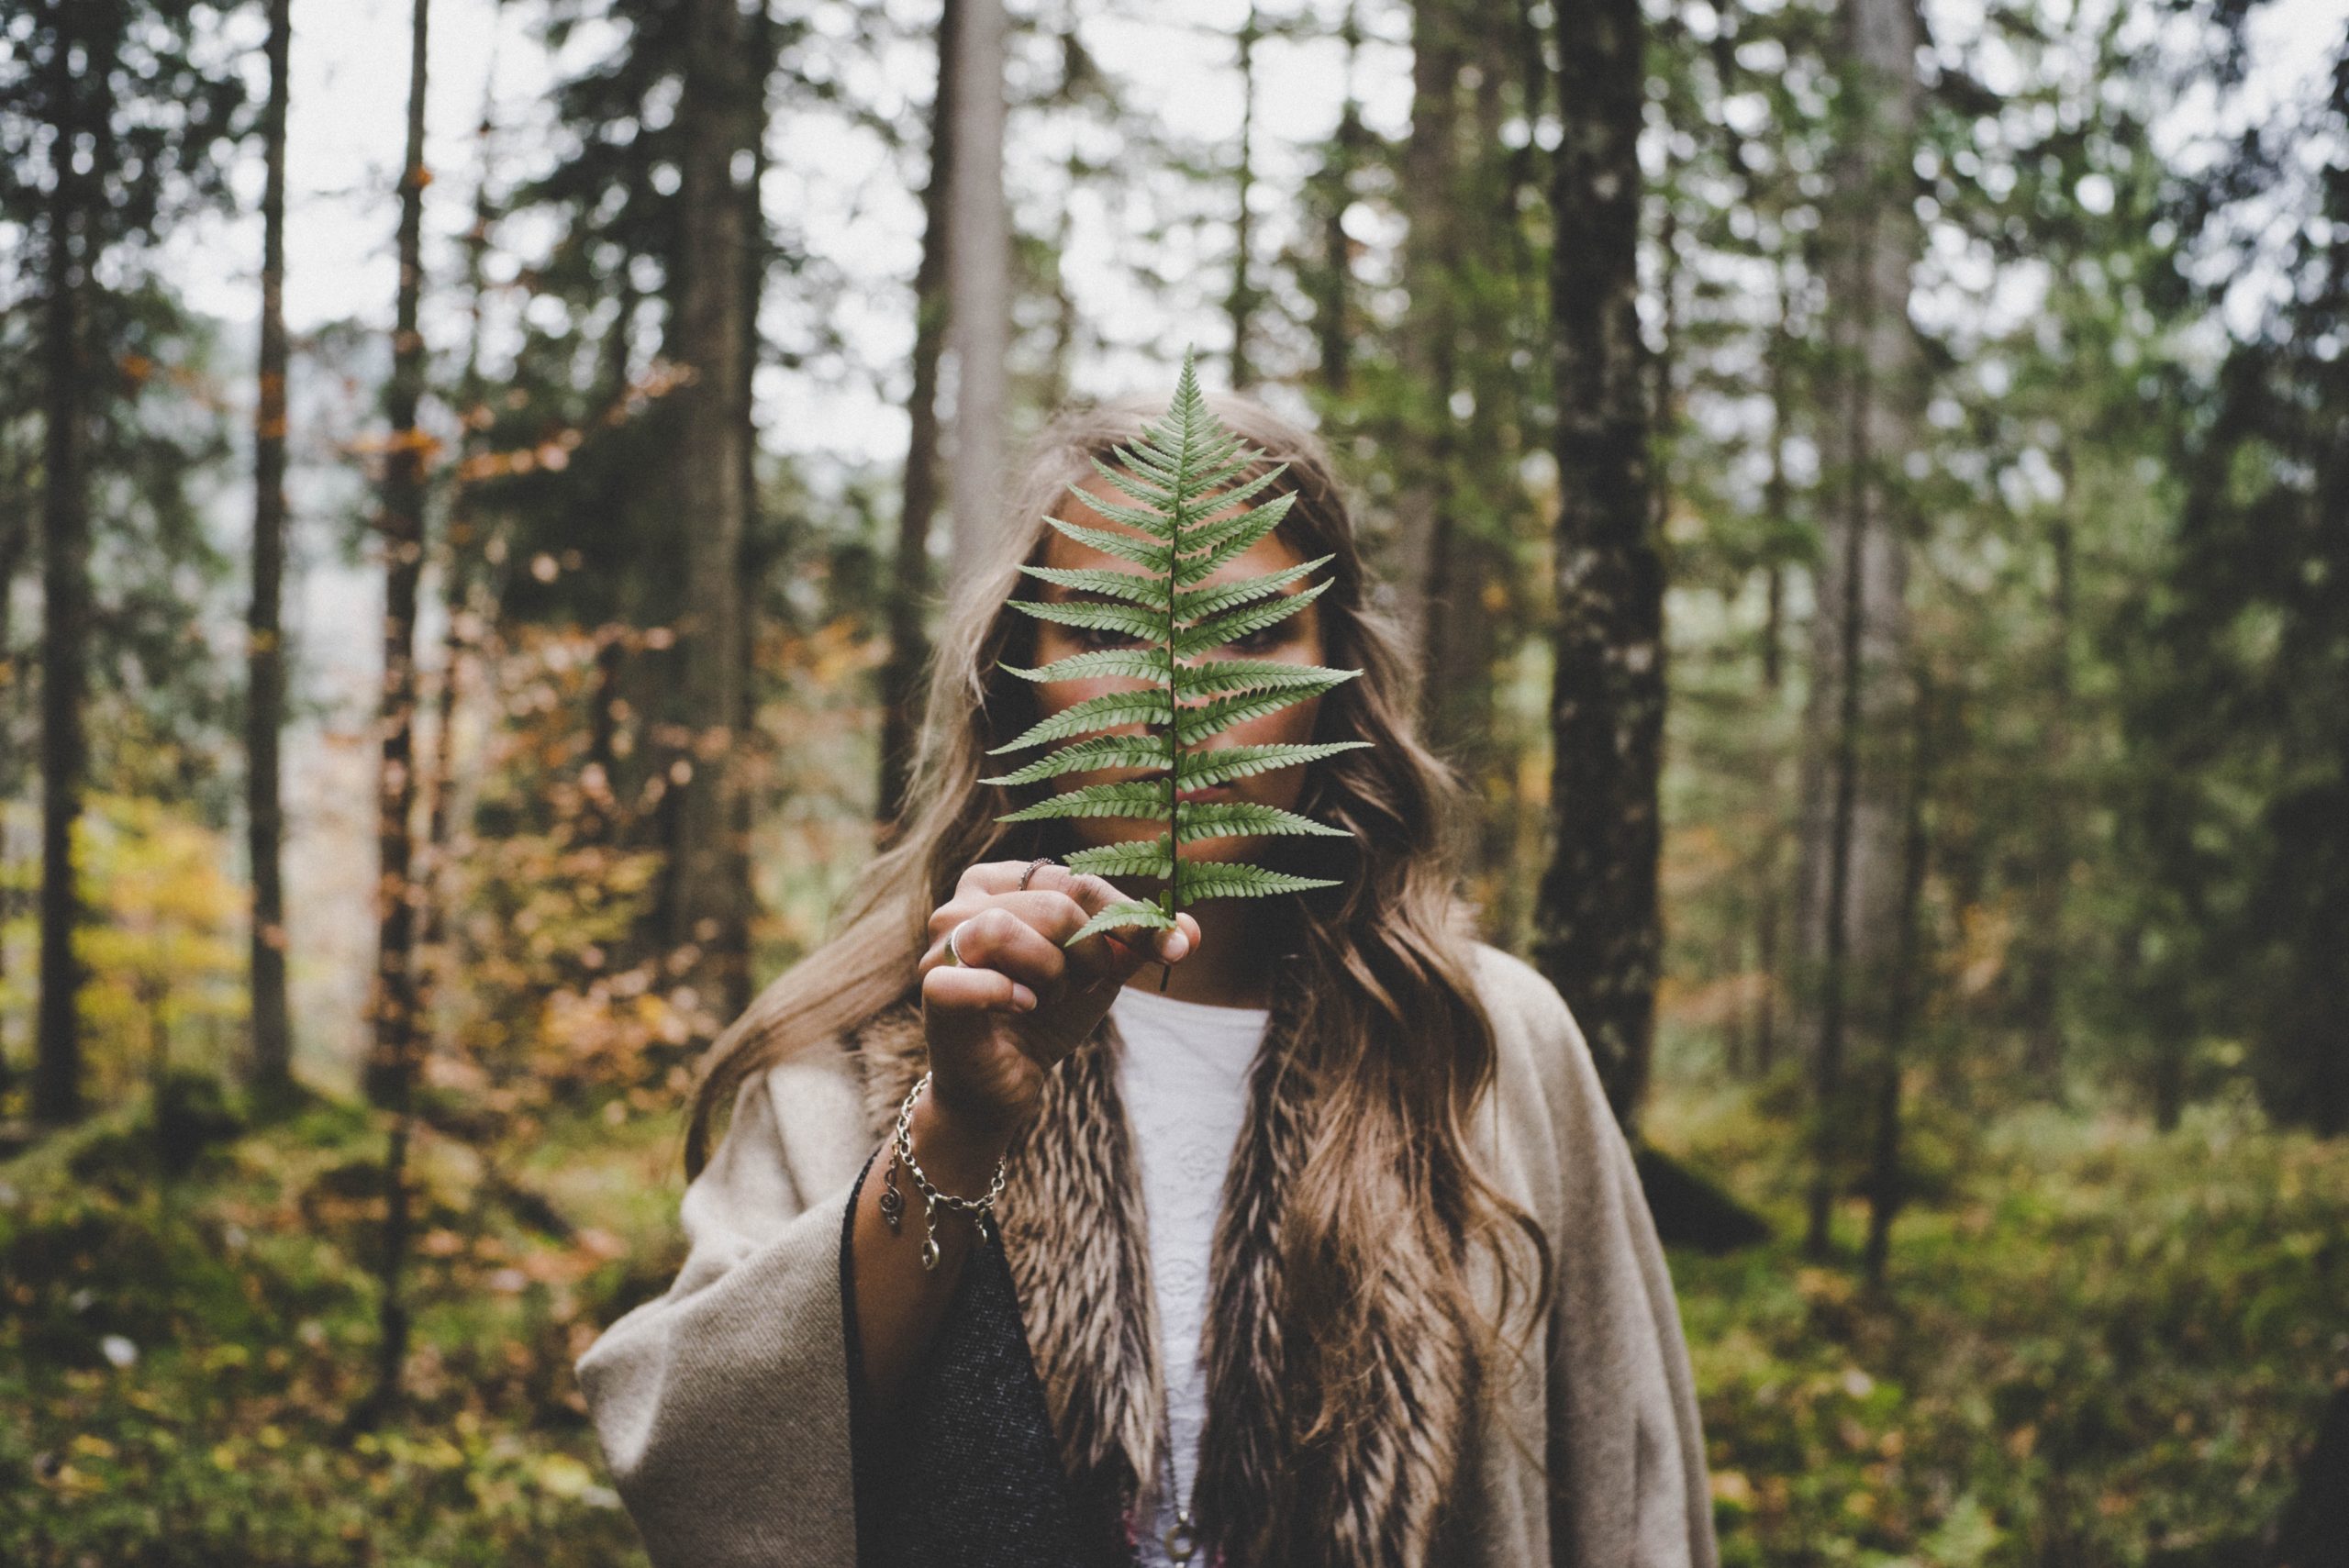 A woman standign in a forest, holding a leaf in front of her face.